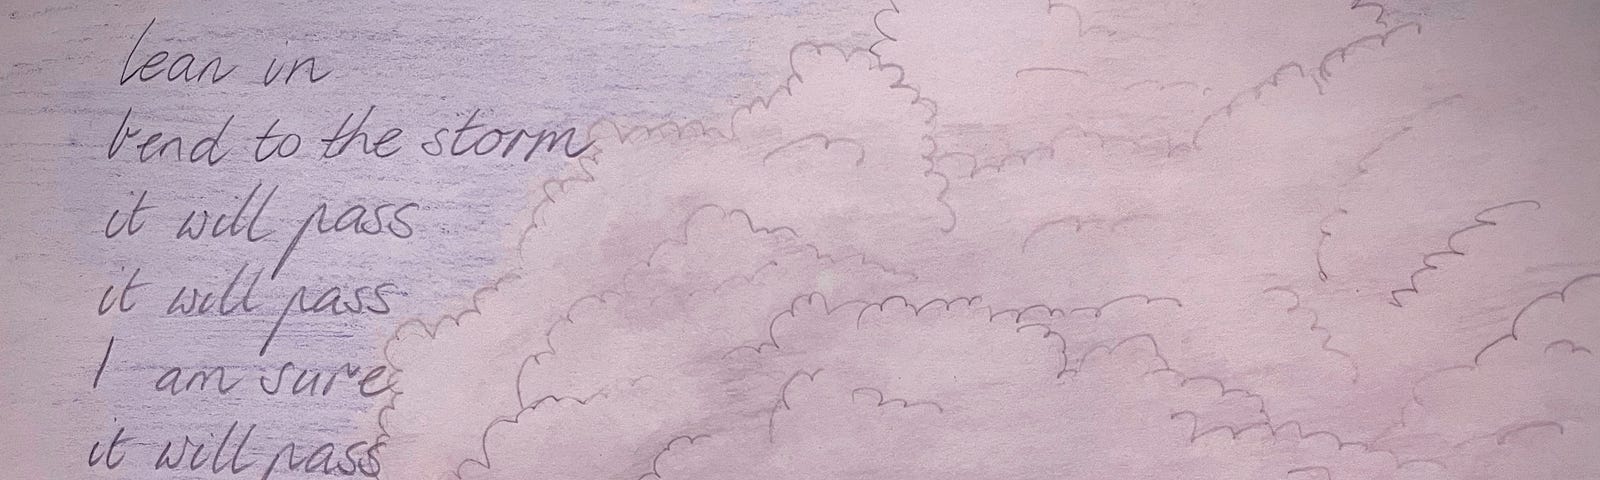 A coloured pencil illustration of storm clouds and several lines of handwritten words.